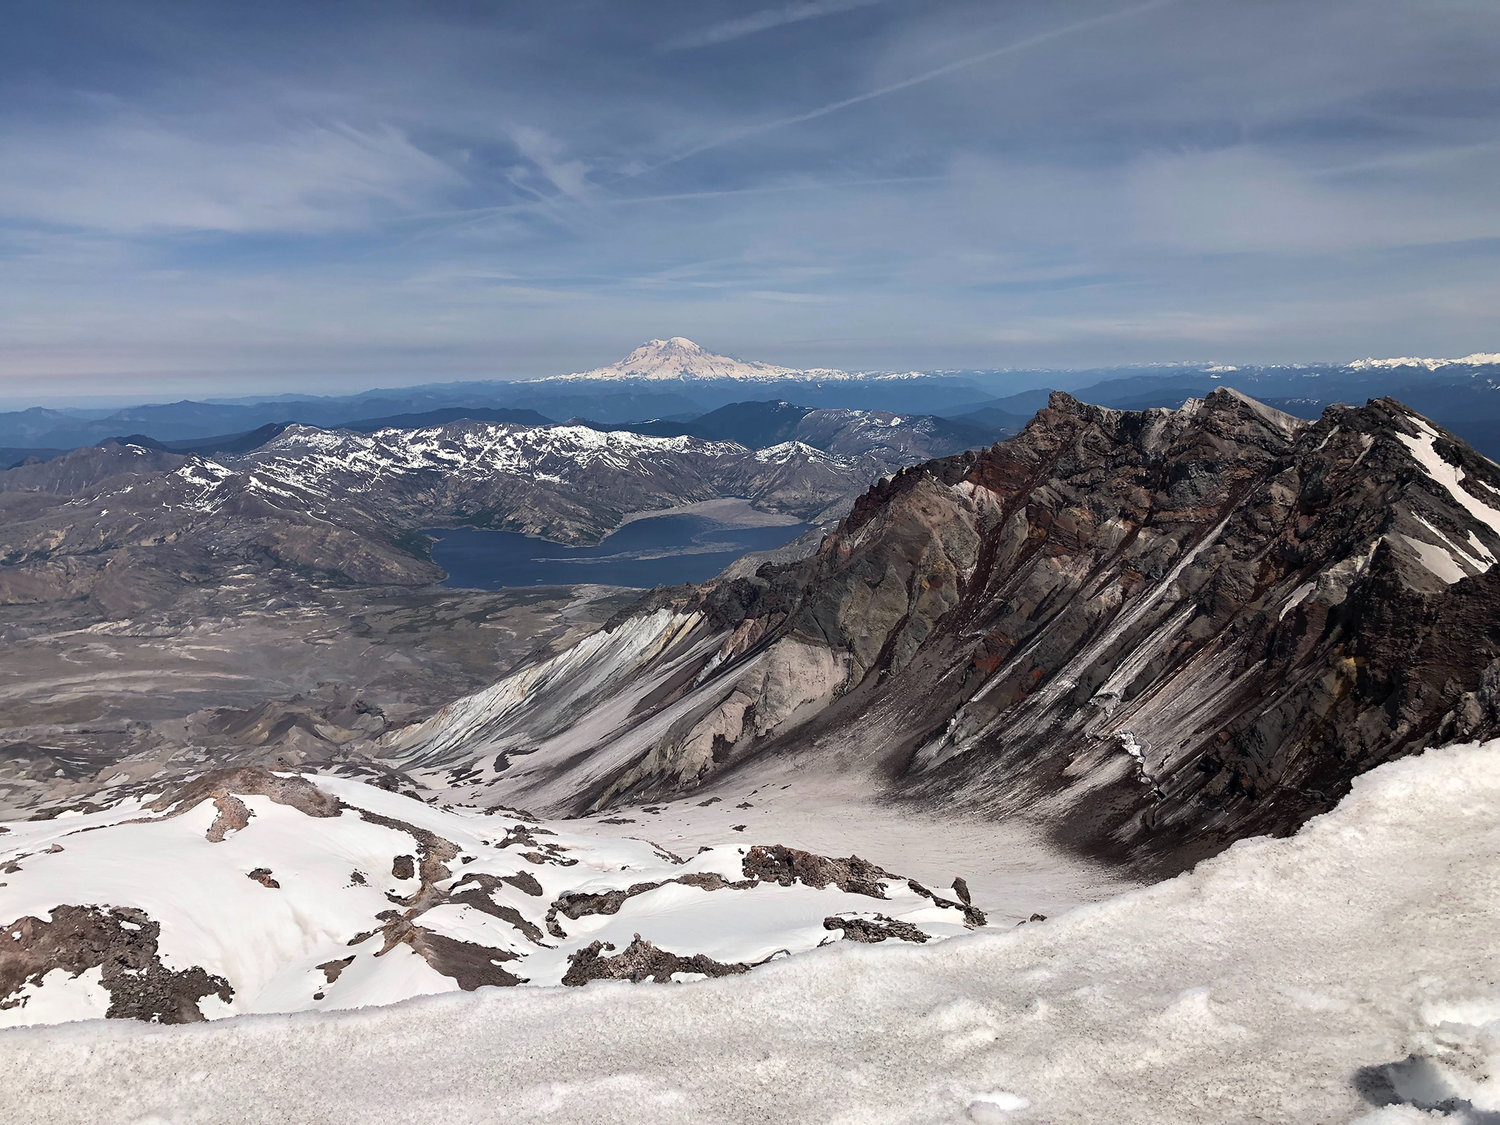 Mount Rainier and Spirit Lake are seen from the summit of Mount St. Helens in this May 2019 Chronicle file photo.